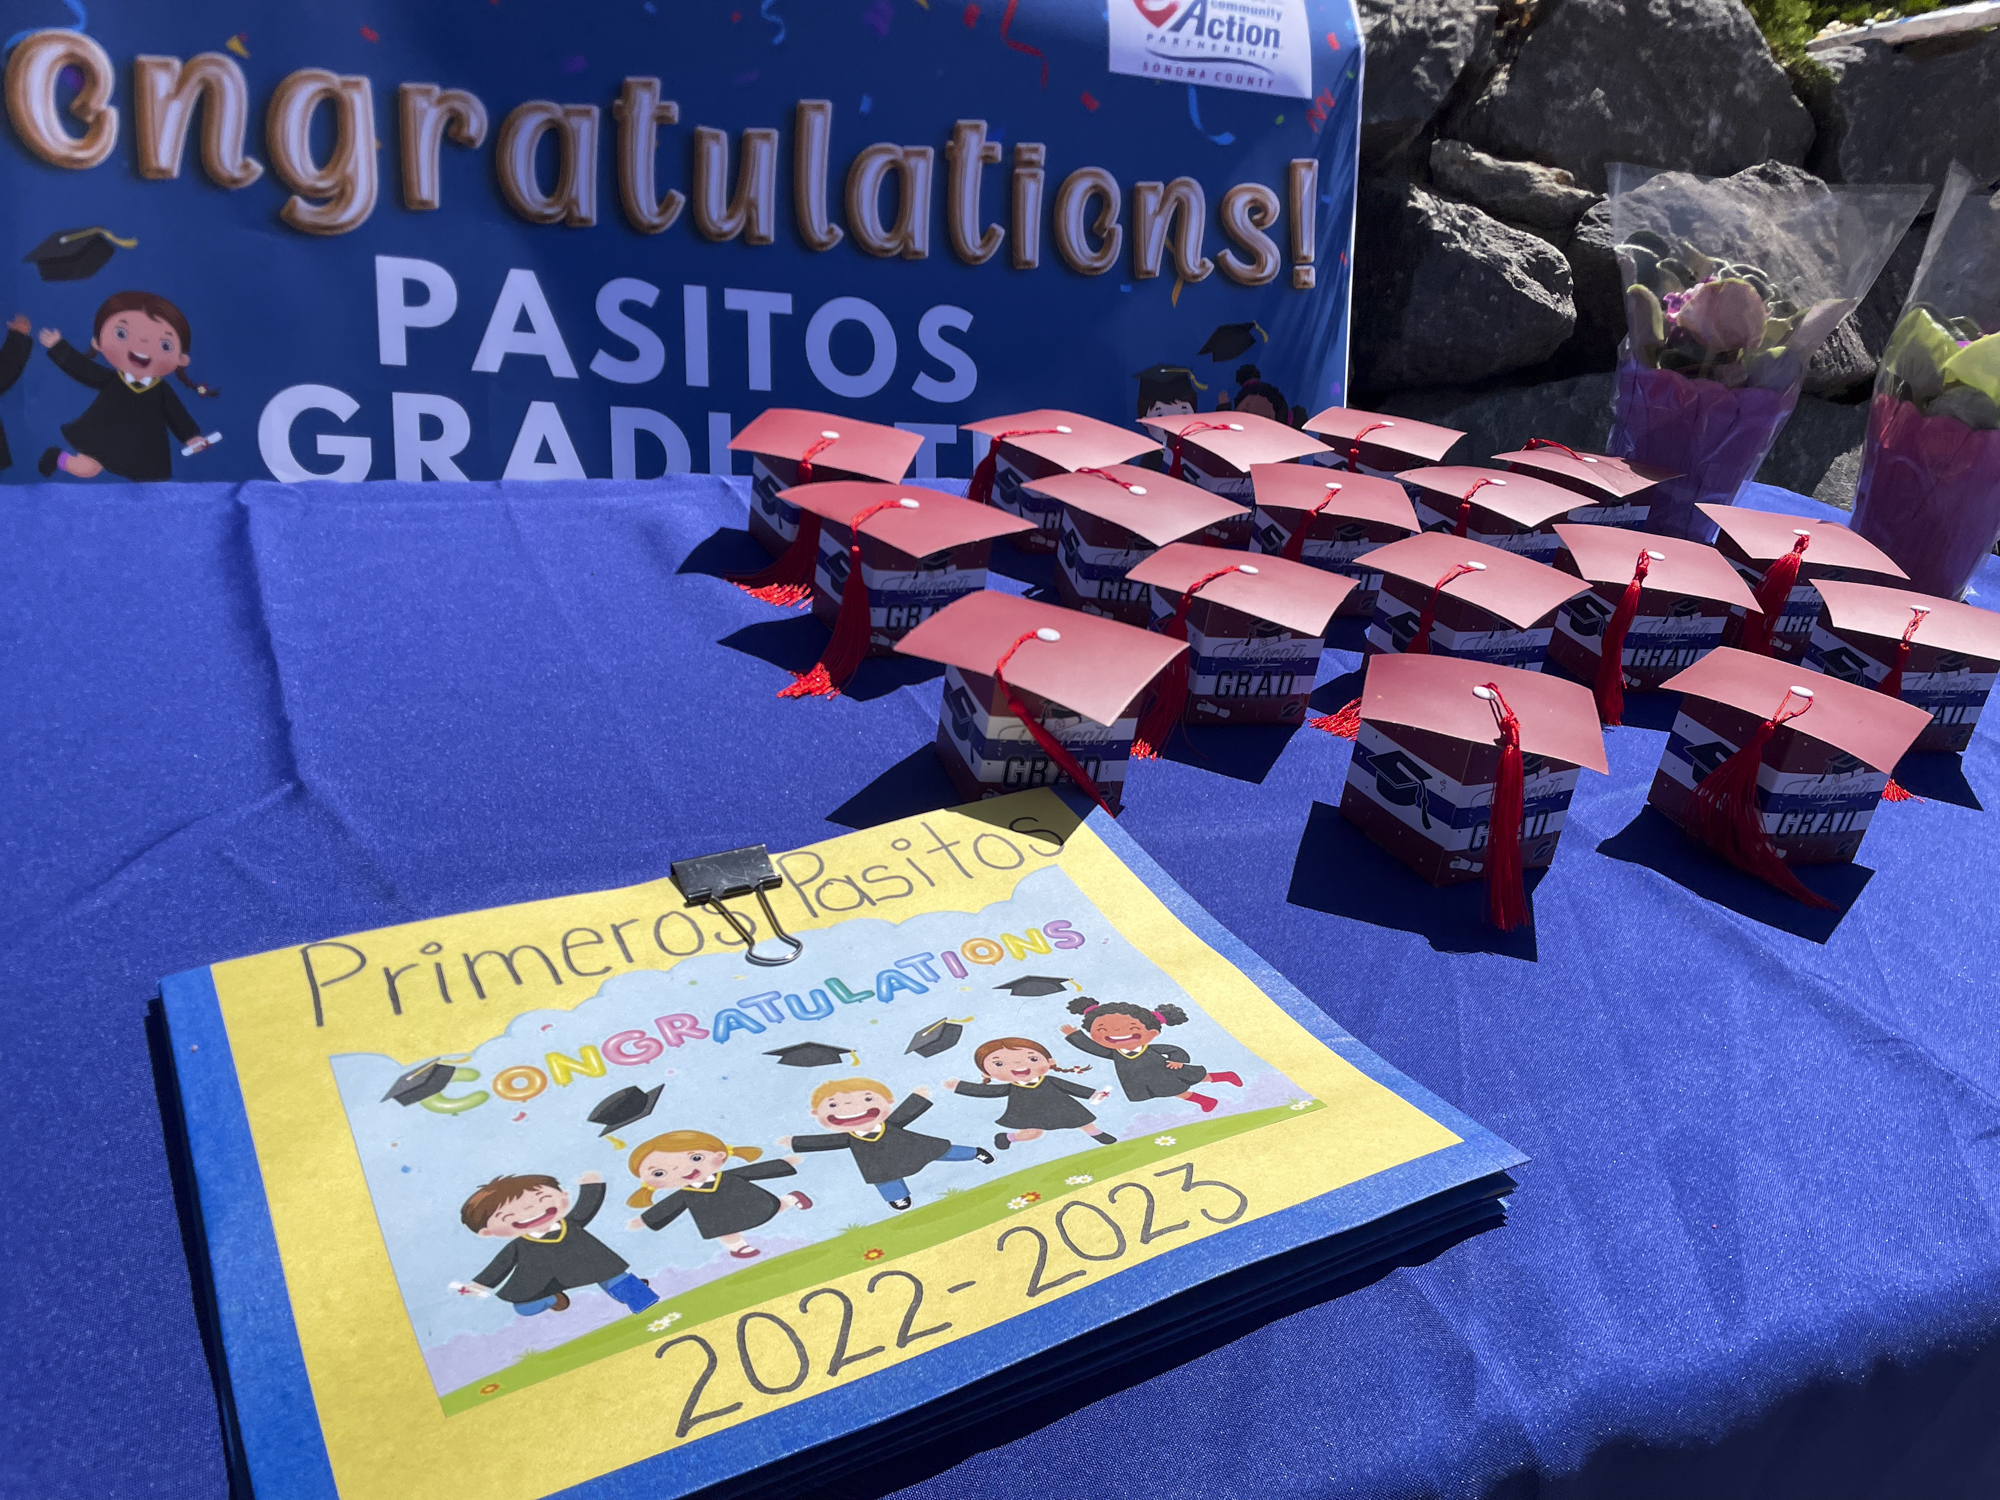 A table top with with a blue table cloth and cardboard graduation caps and paperwork reading "Primeros Pasitos: Congratulations."